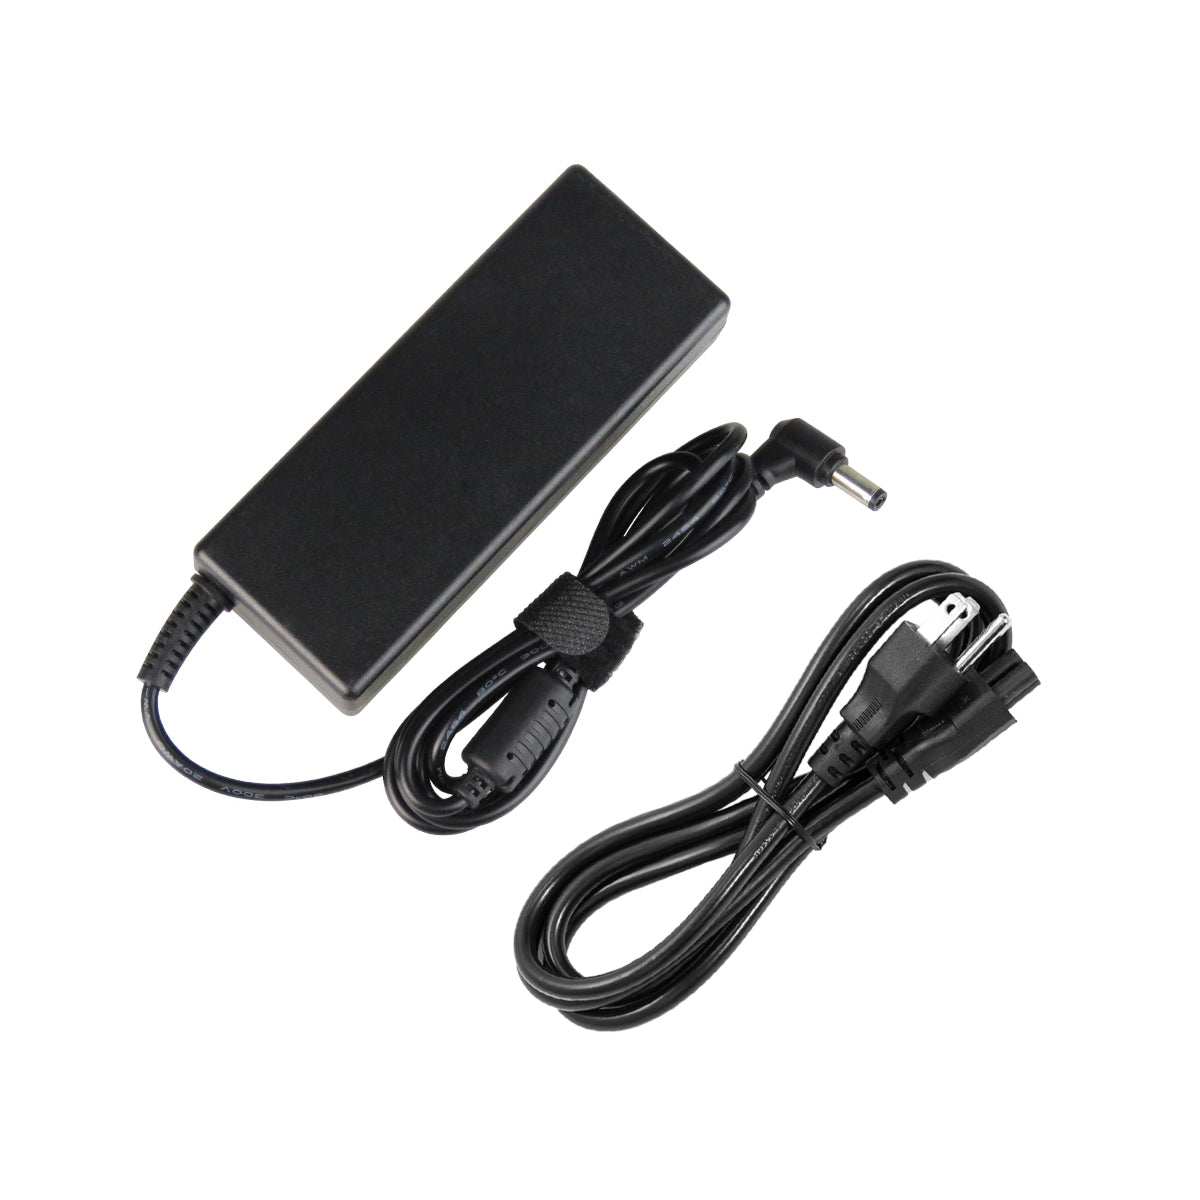 AC Adapter Charger for Gateway MX8739 Notebook.